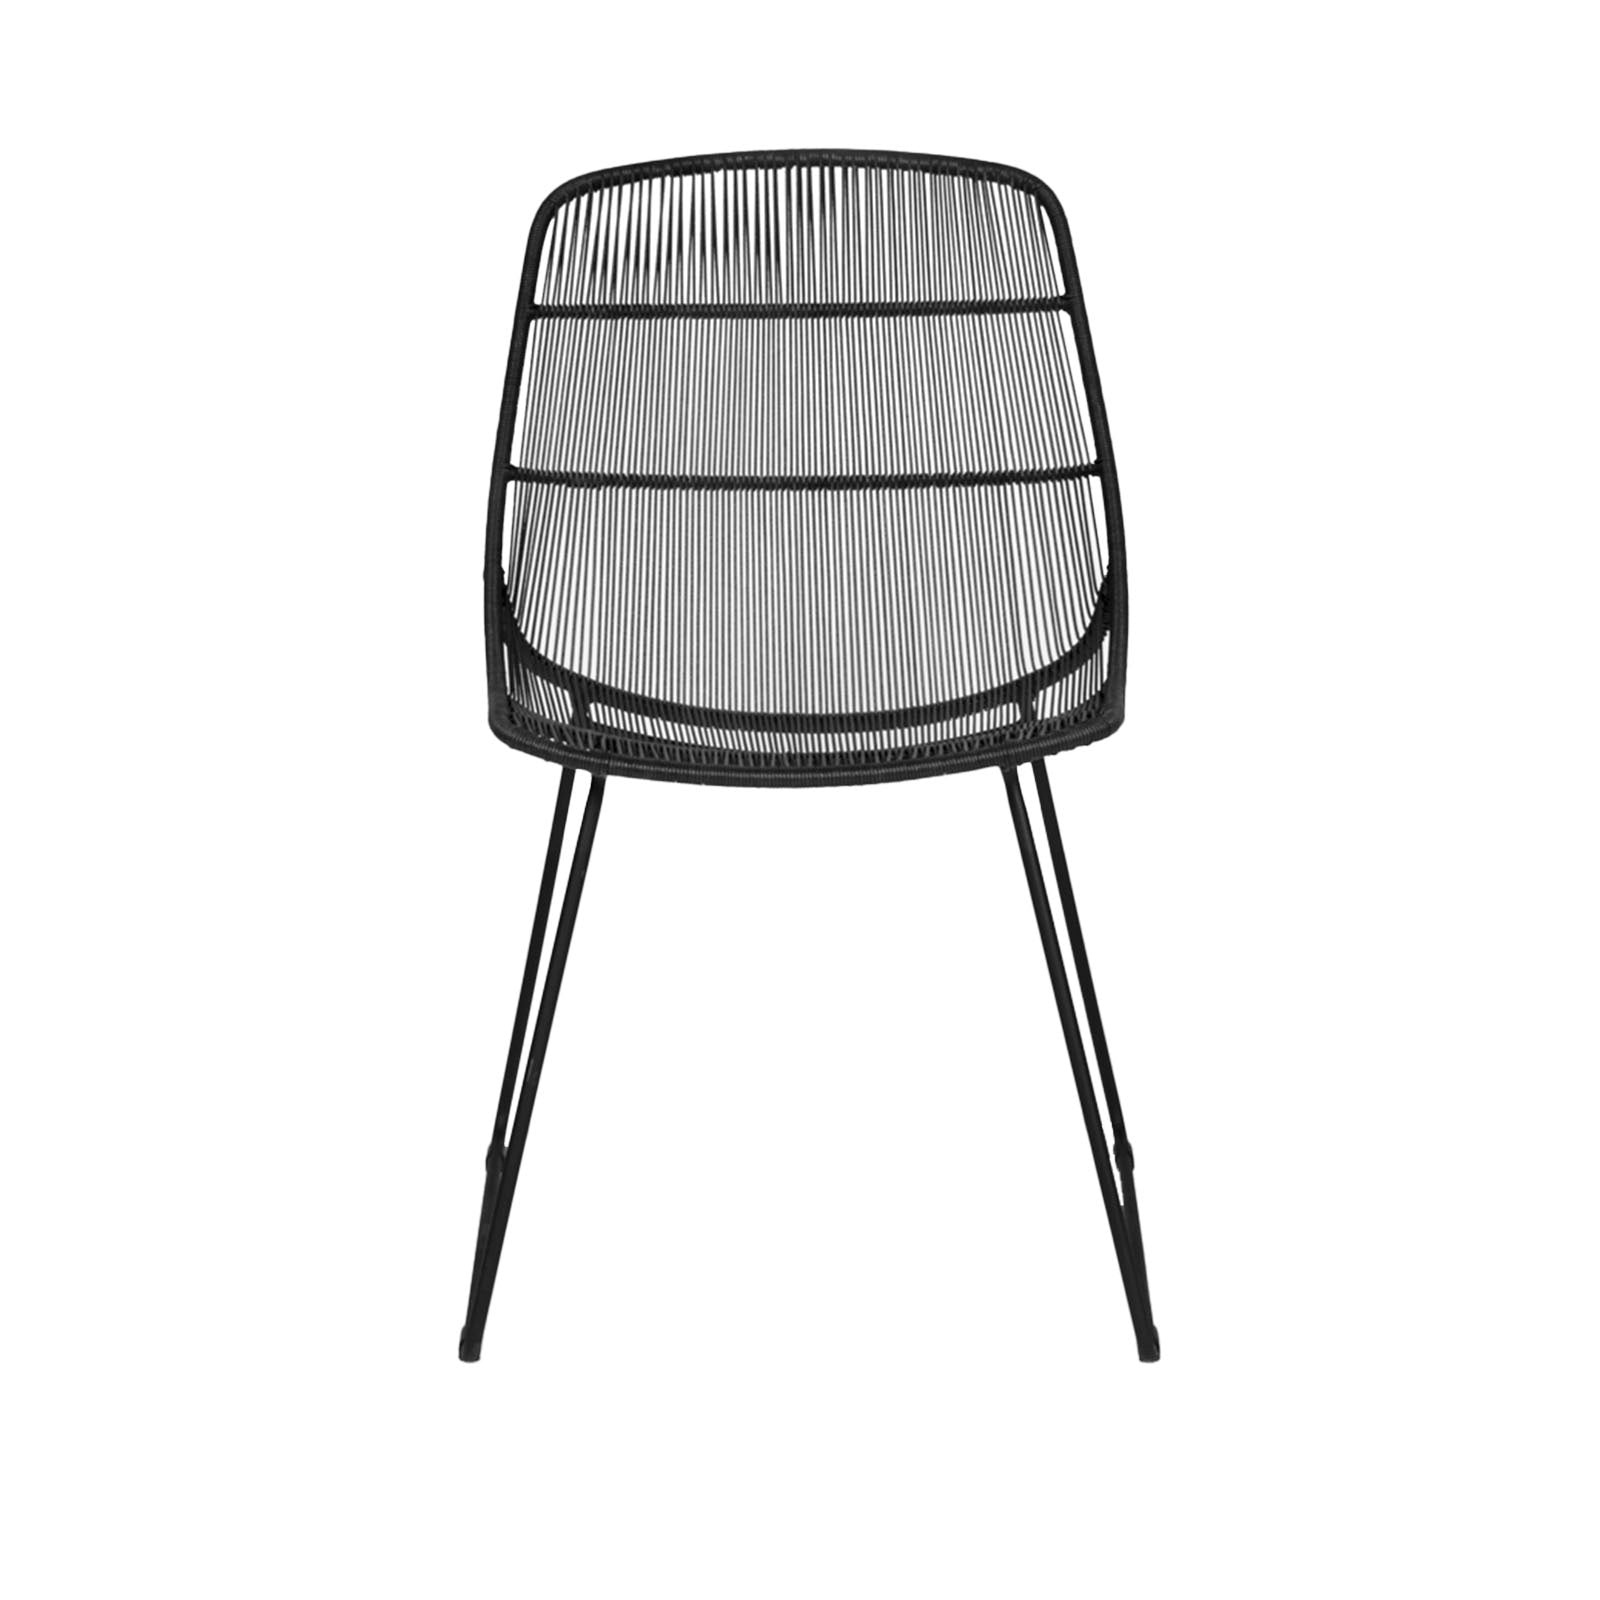 Design Warehouse - 127342 - Oliver Outdoor Wicker Dining Side Chair  - Black